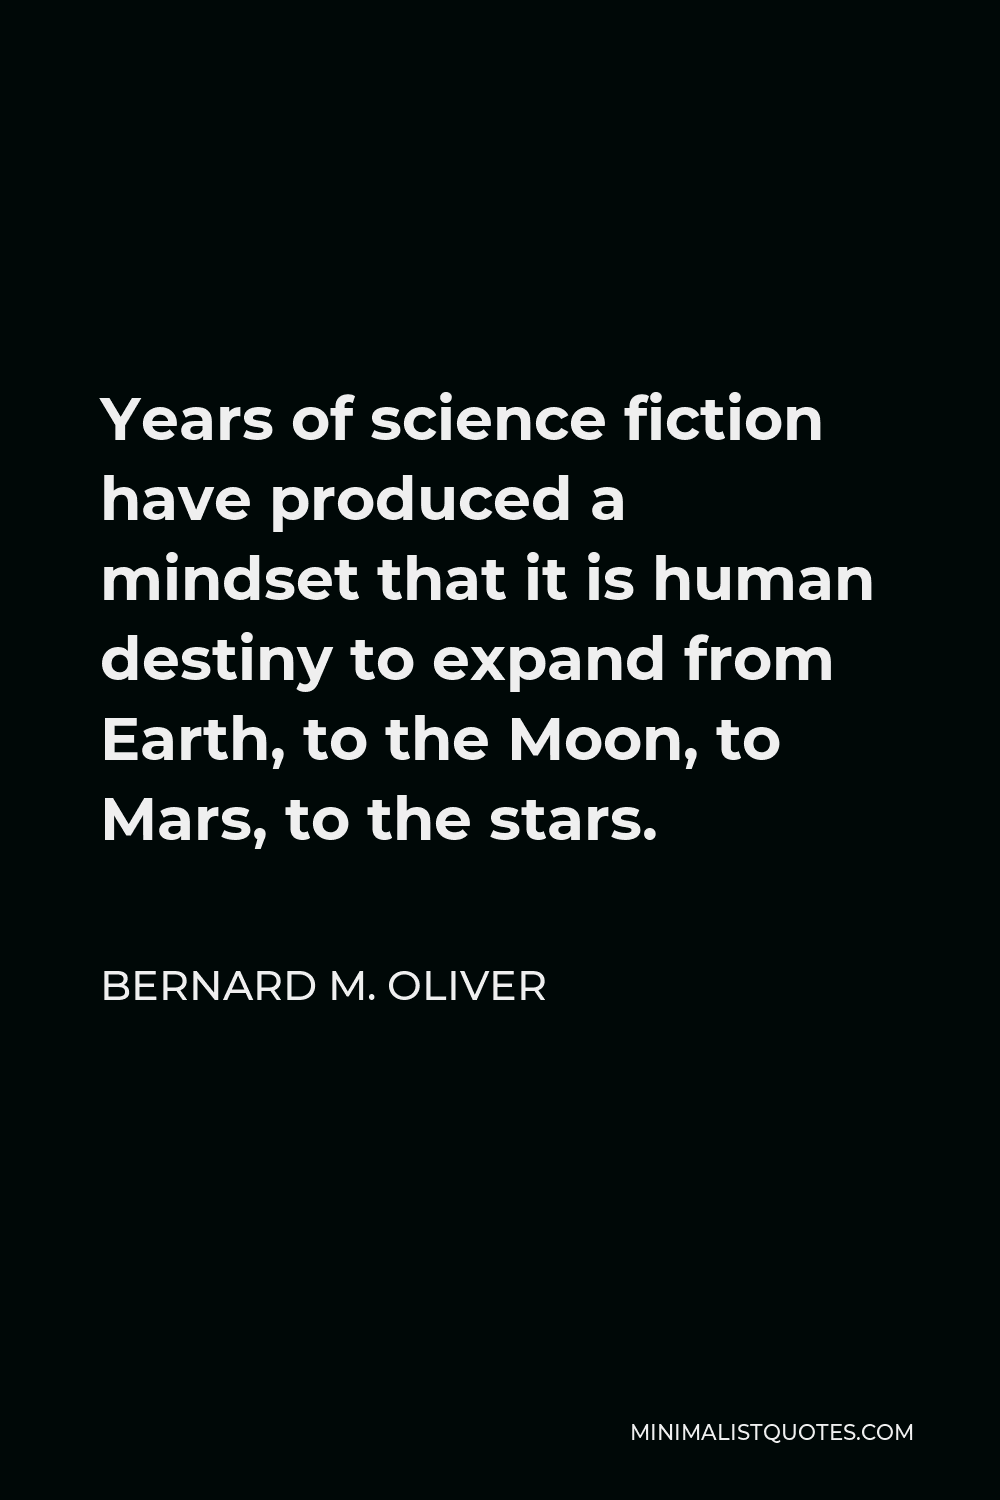 Bernard M. Oliver Quote - Years of science fiction have produced a mindset that it is human destiny to expand from Earth, to the Moon, to Mars, to the stars.